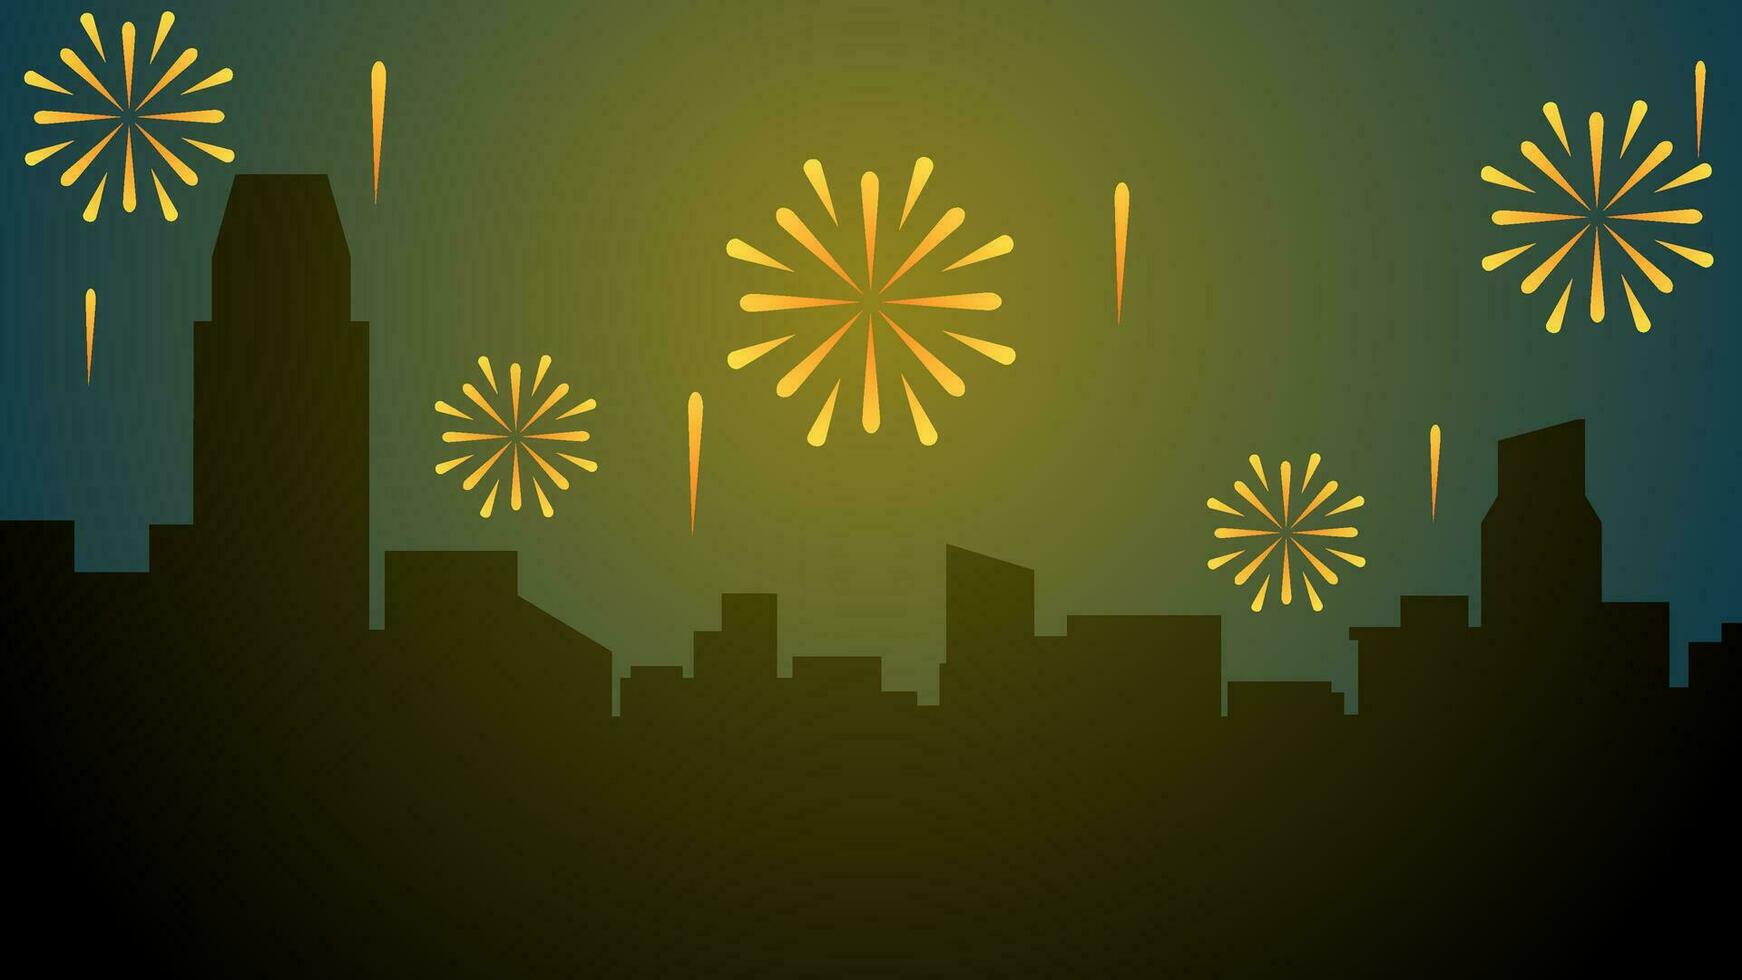 New year cityscape vector illustration. Scenery of city with sparkling fireworks in new year event. City landscape for illustration, background or wallpaper. City silhouette in the firework festival